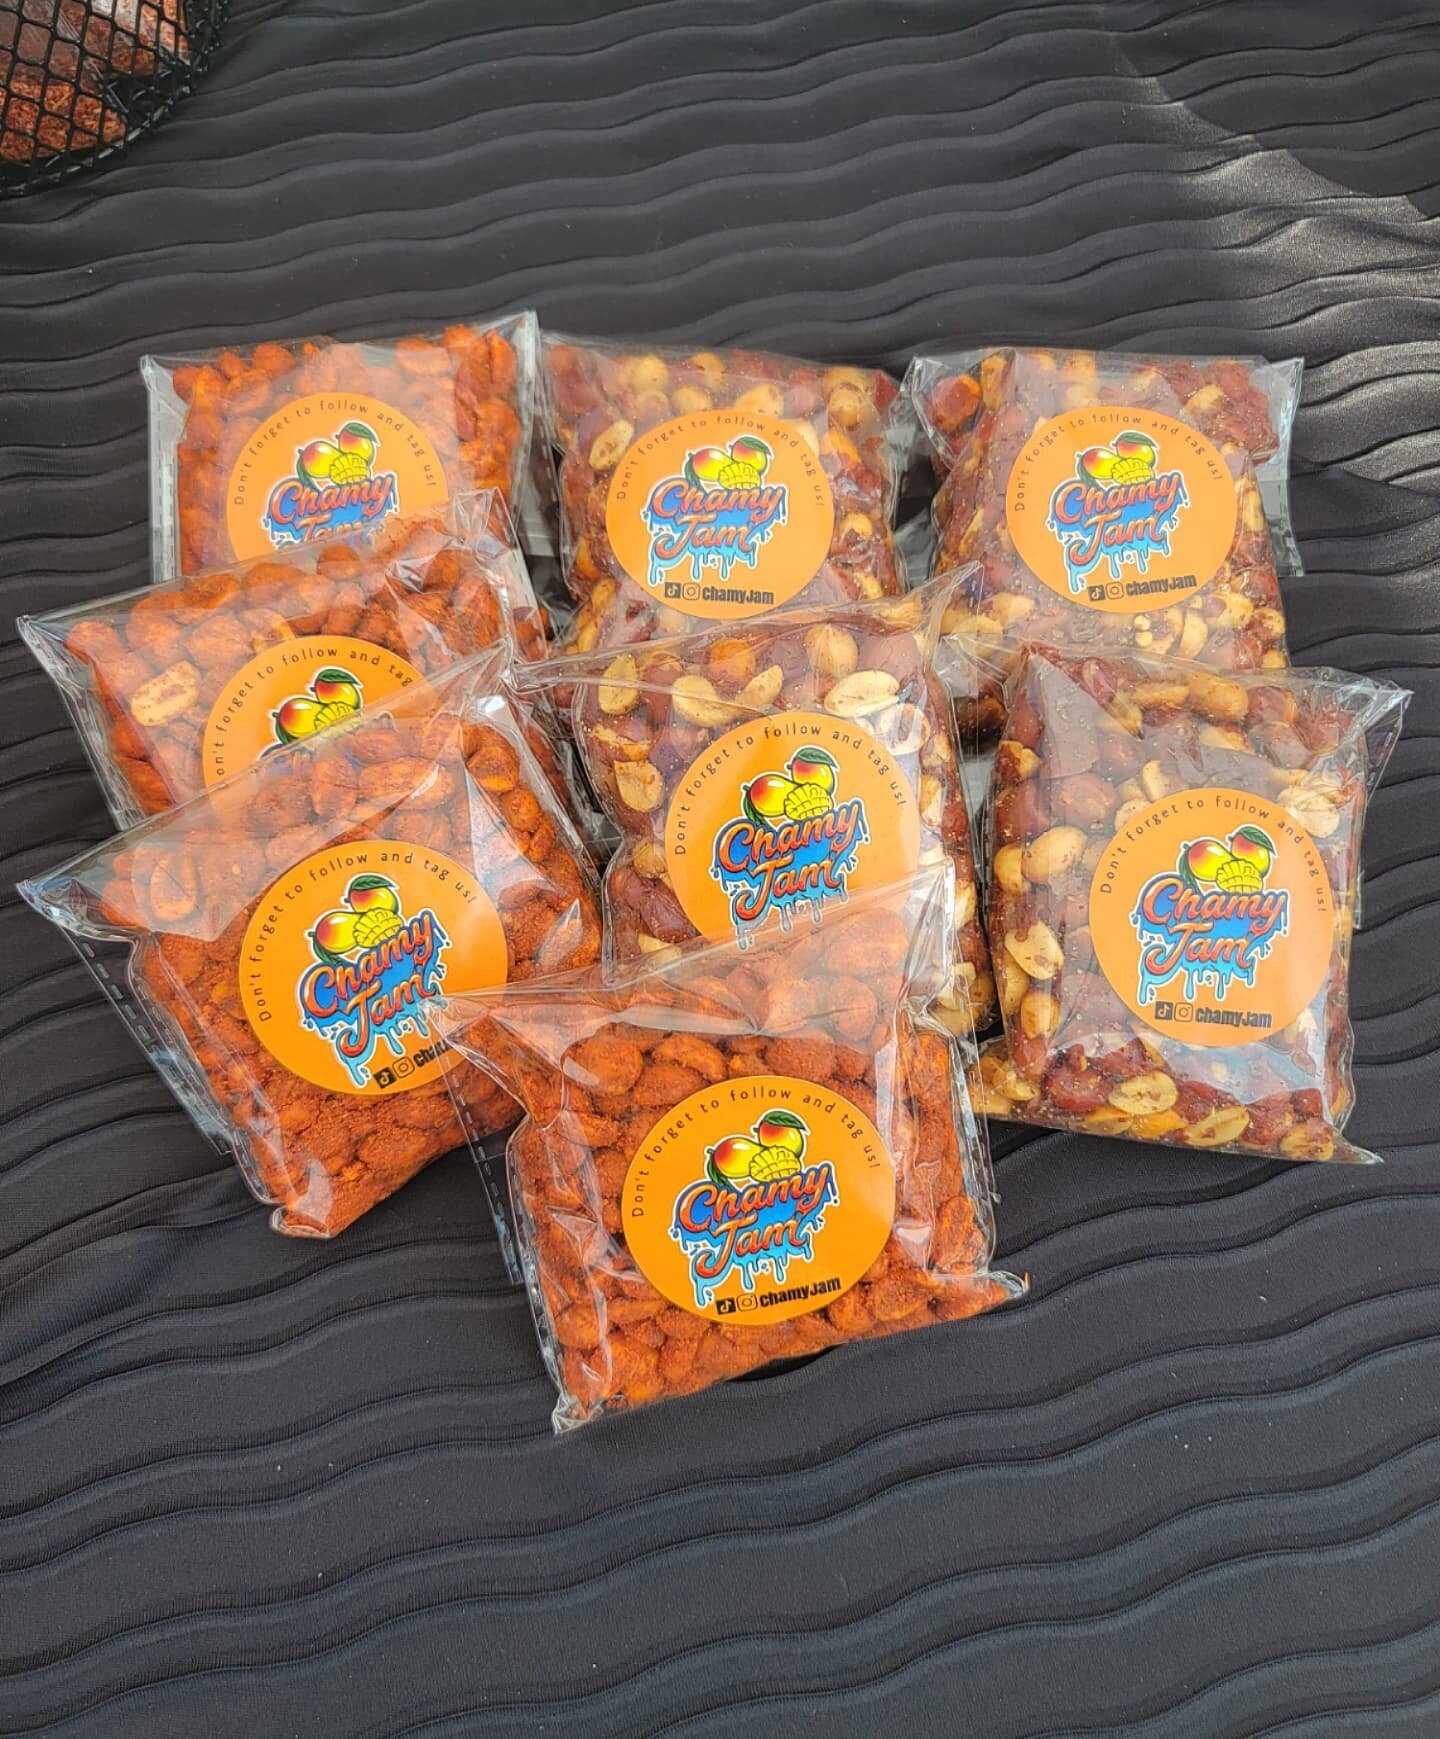 𝟮 𝗡𝗘𝗪 𝗕𝗢𝗧𝗔𝗡𝗔𝗦
In stock and on sale now!

Cacahuates con Chile y Lim&oacute;n
Cacahuates Espa&ntilde;ol

Sold in 4oz (as shown on images) and 1lb sizes